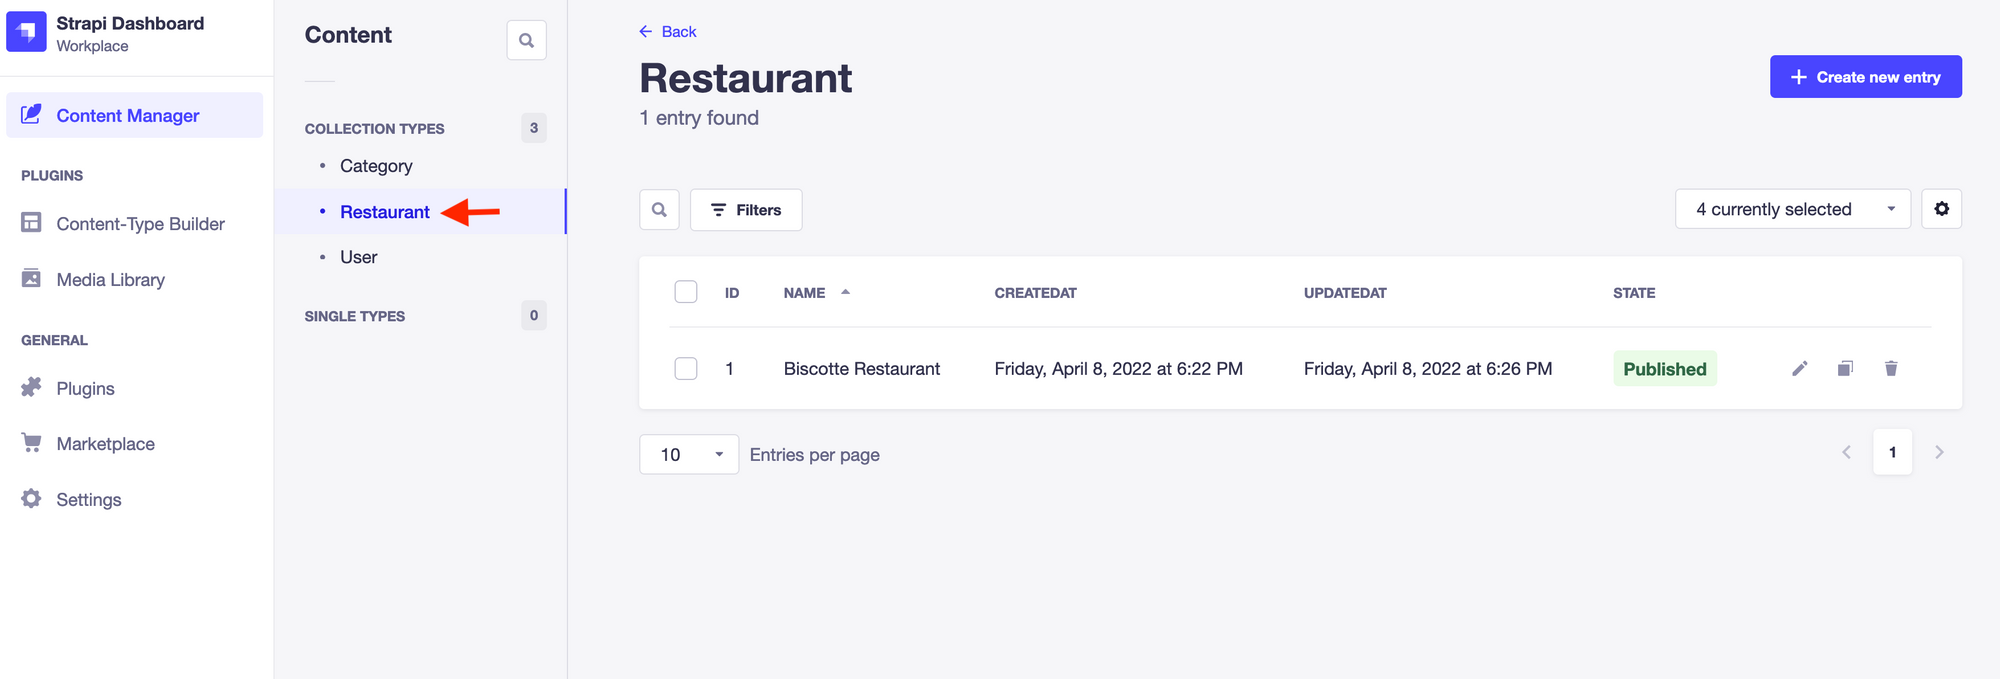 Strapi dashboard: Content manager side menu, arrow indicating the location of the Restaurant Collection Type 